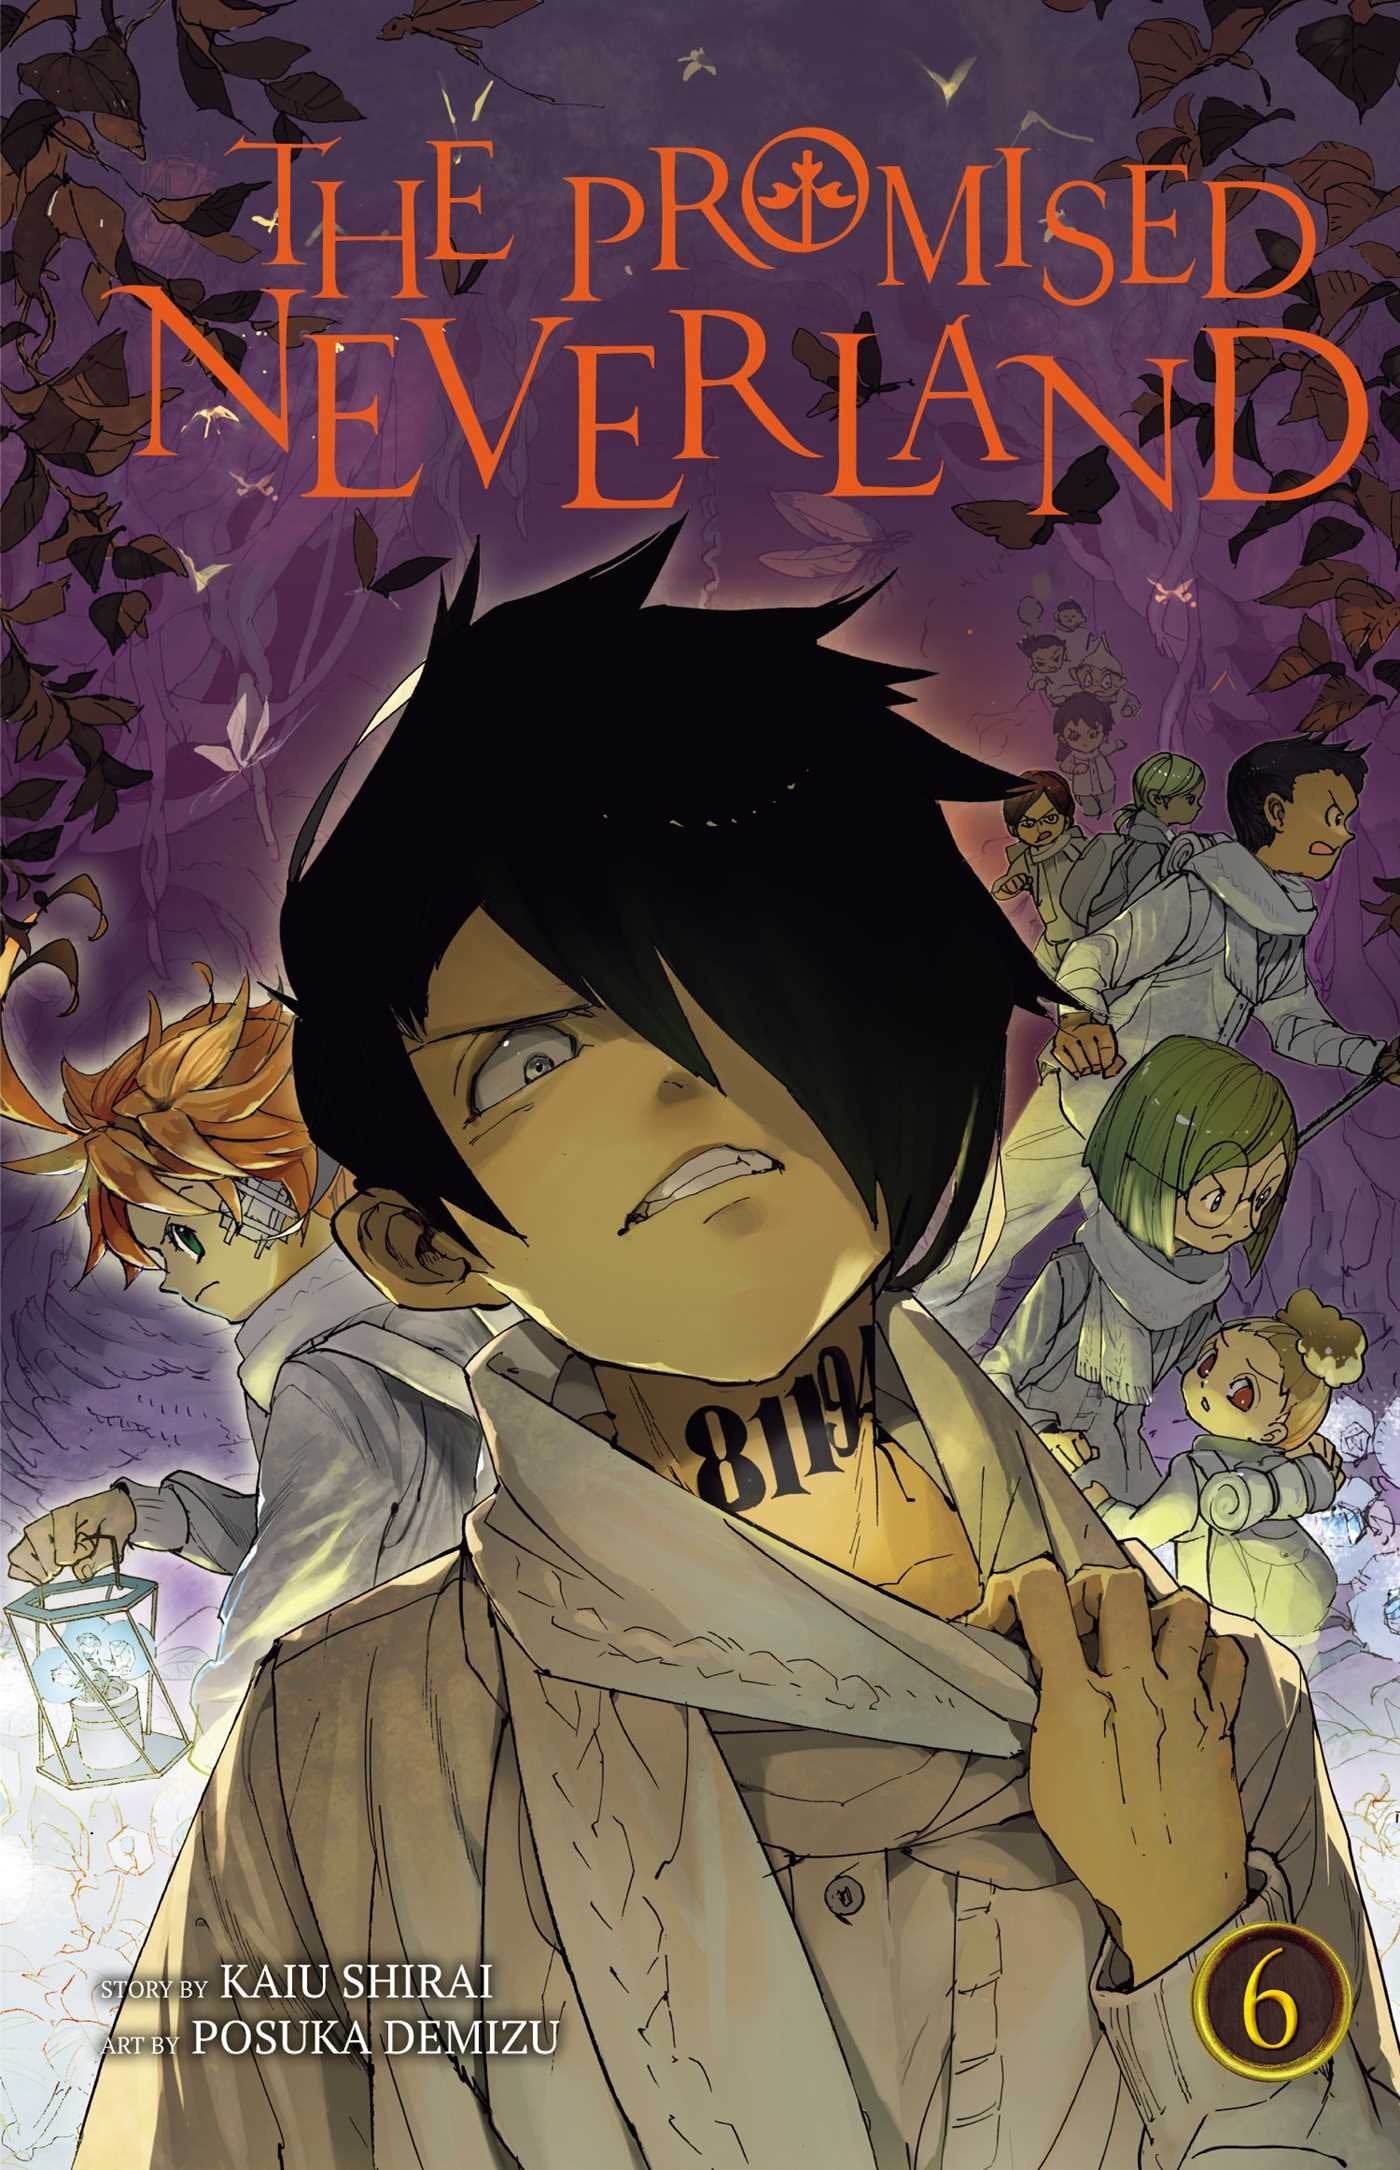 The Promised Neverland, Vol. 6 (6)